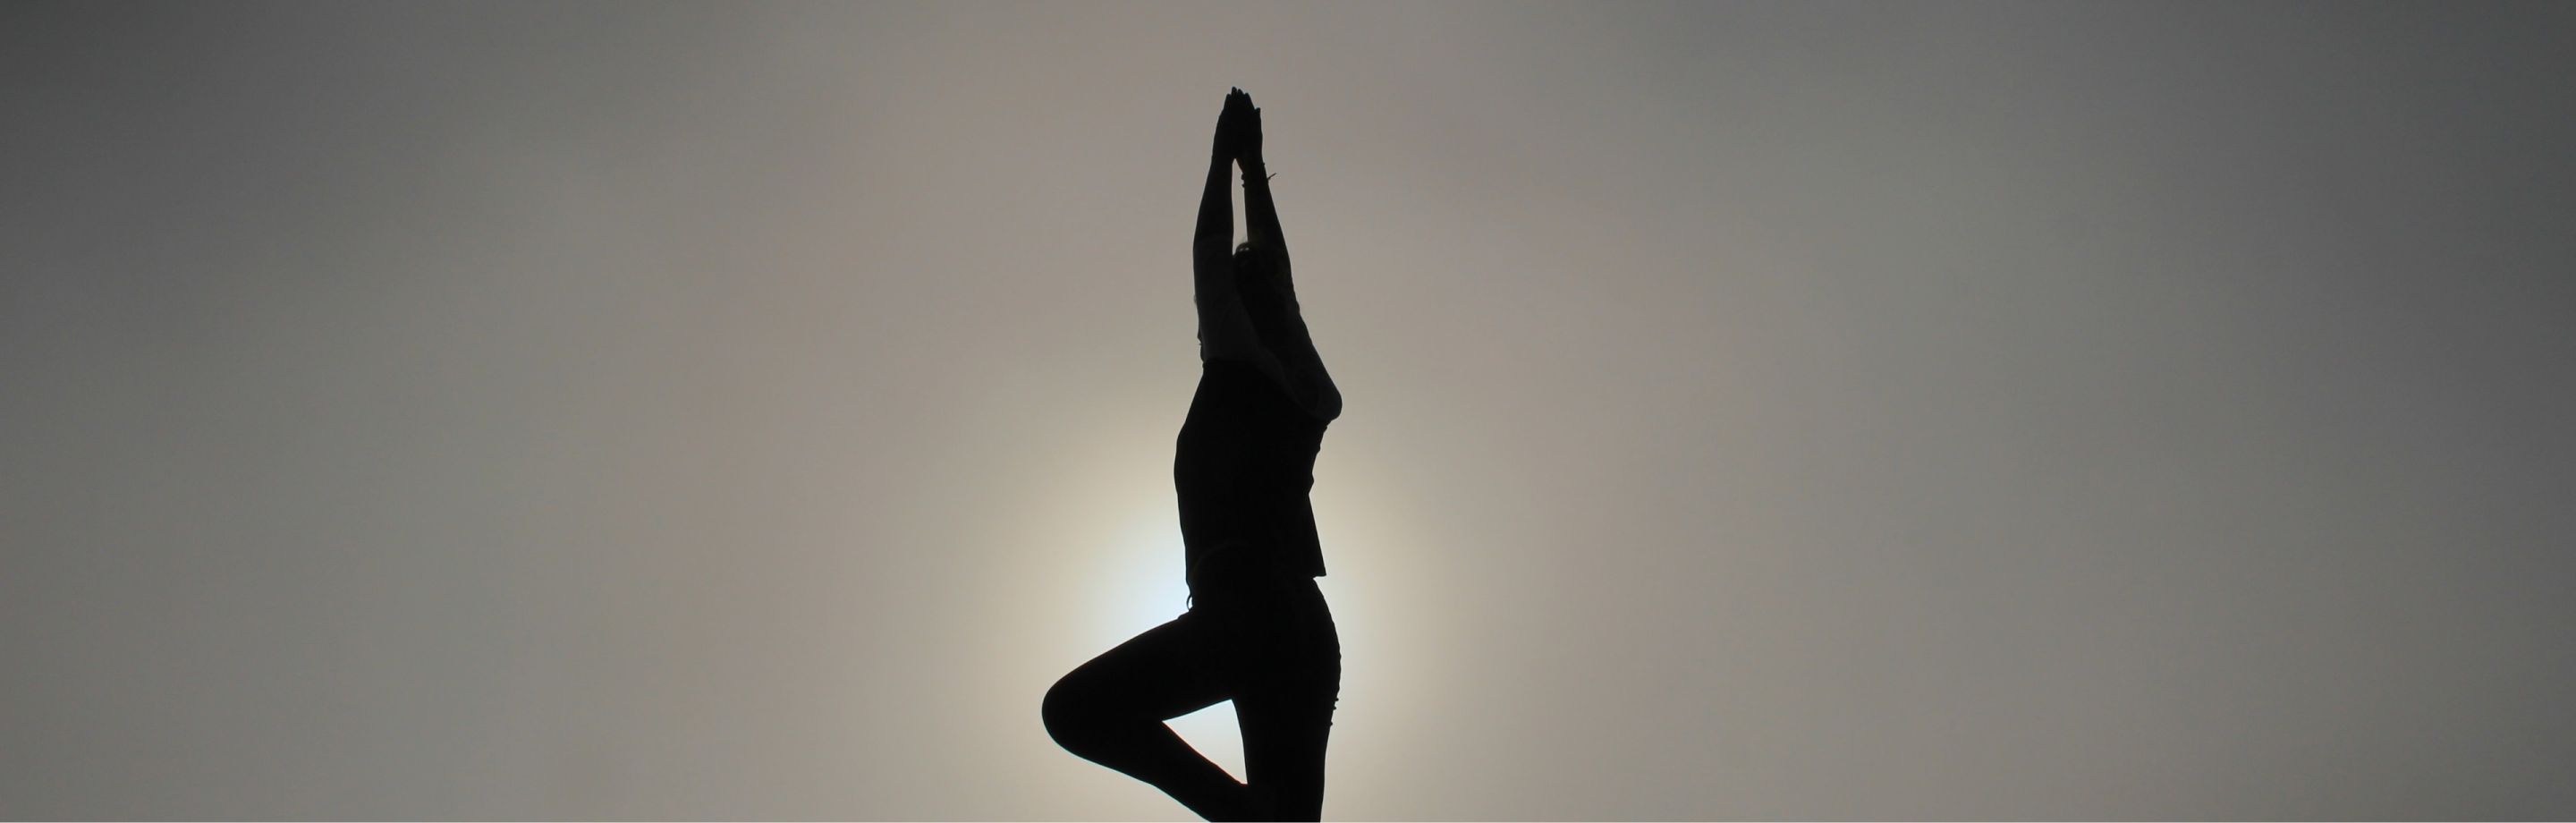 Silhouetted figure achieving balance, representing Biofuse's focus on holistic health and well-being.